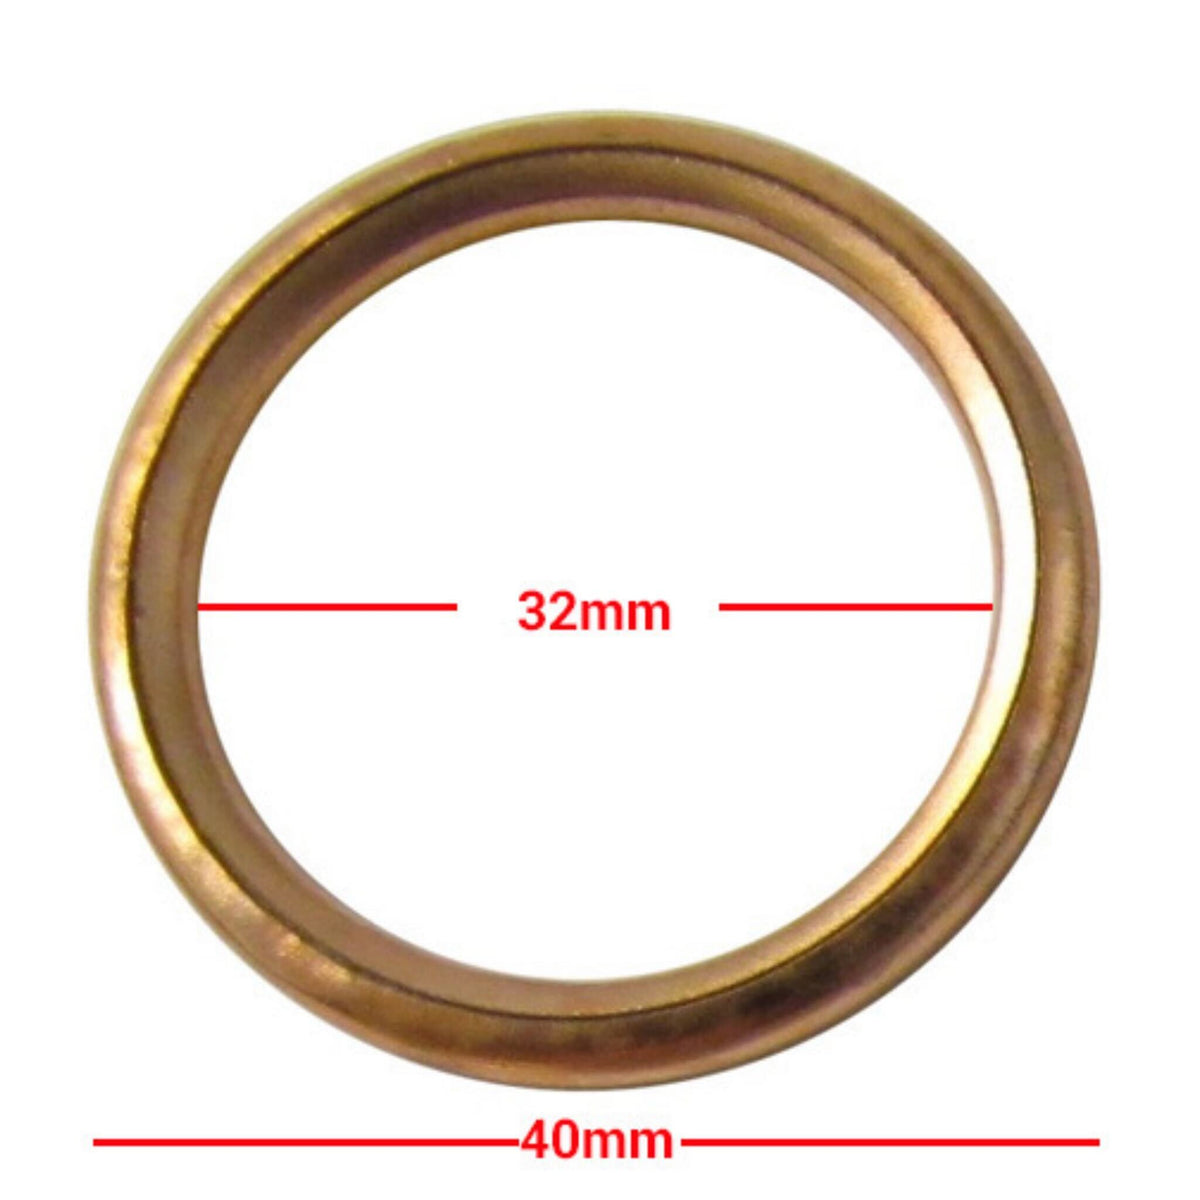 Copper Exhaust Gasket 40mm/32mm 5mm Thickness